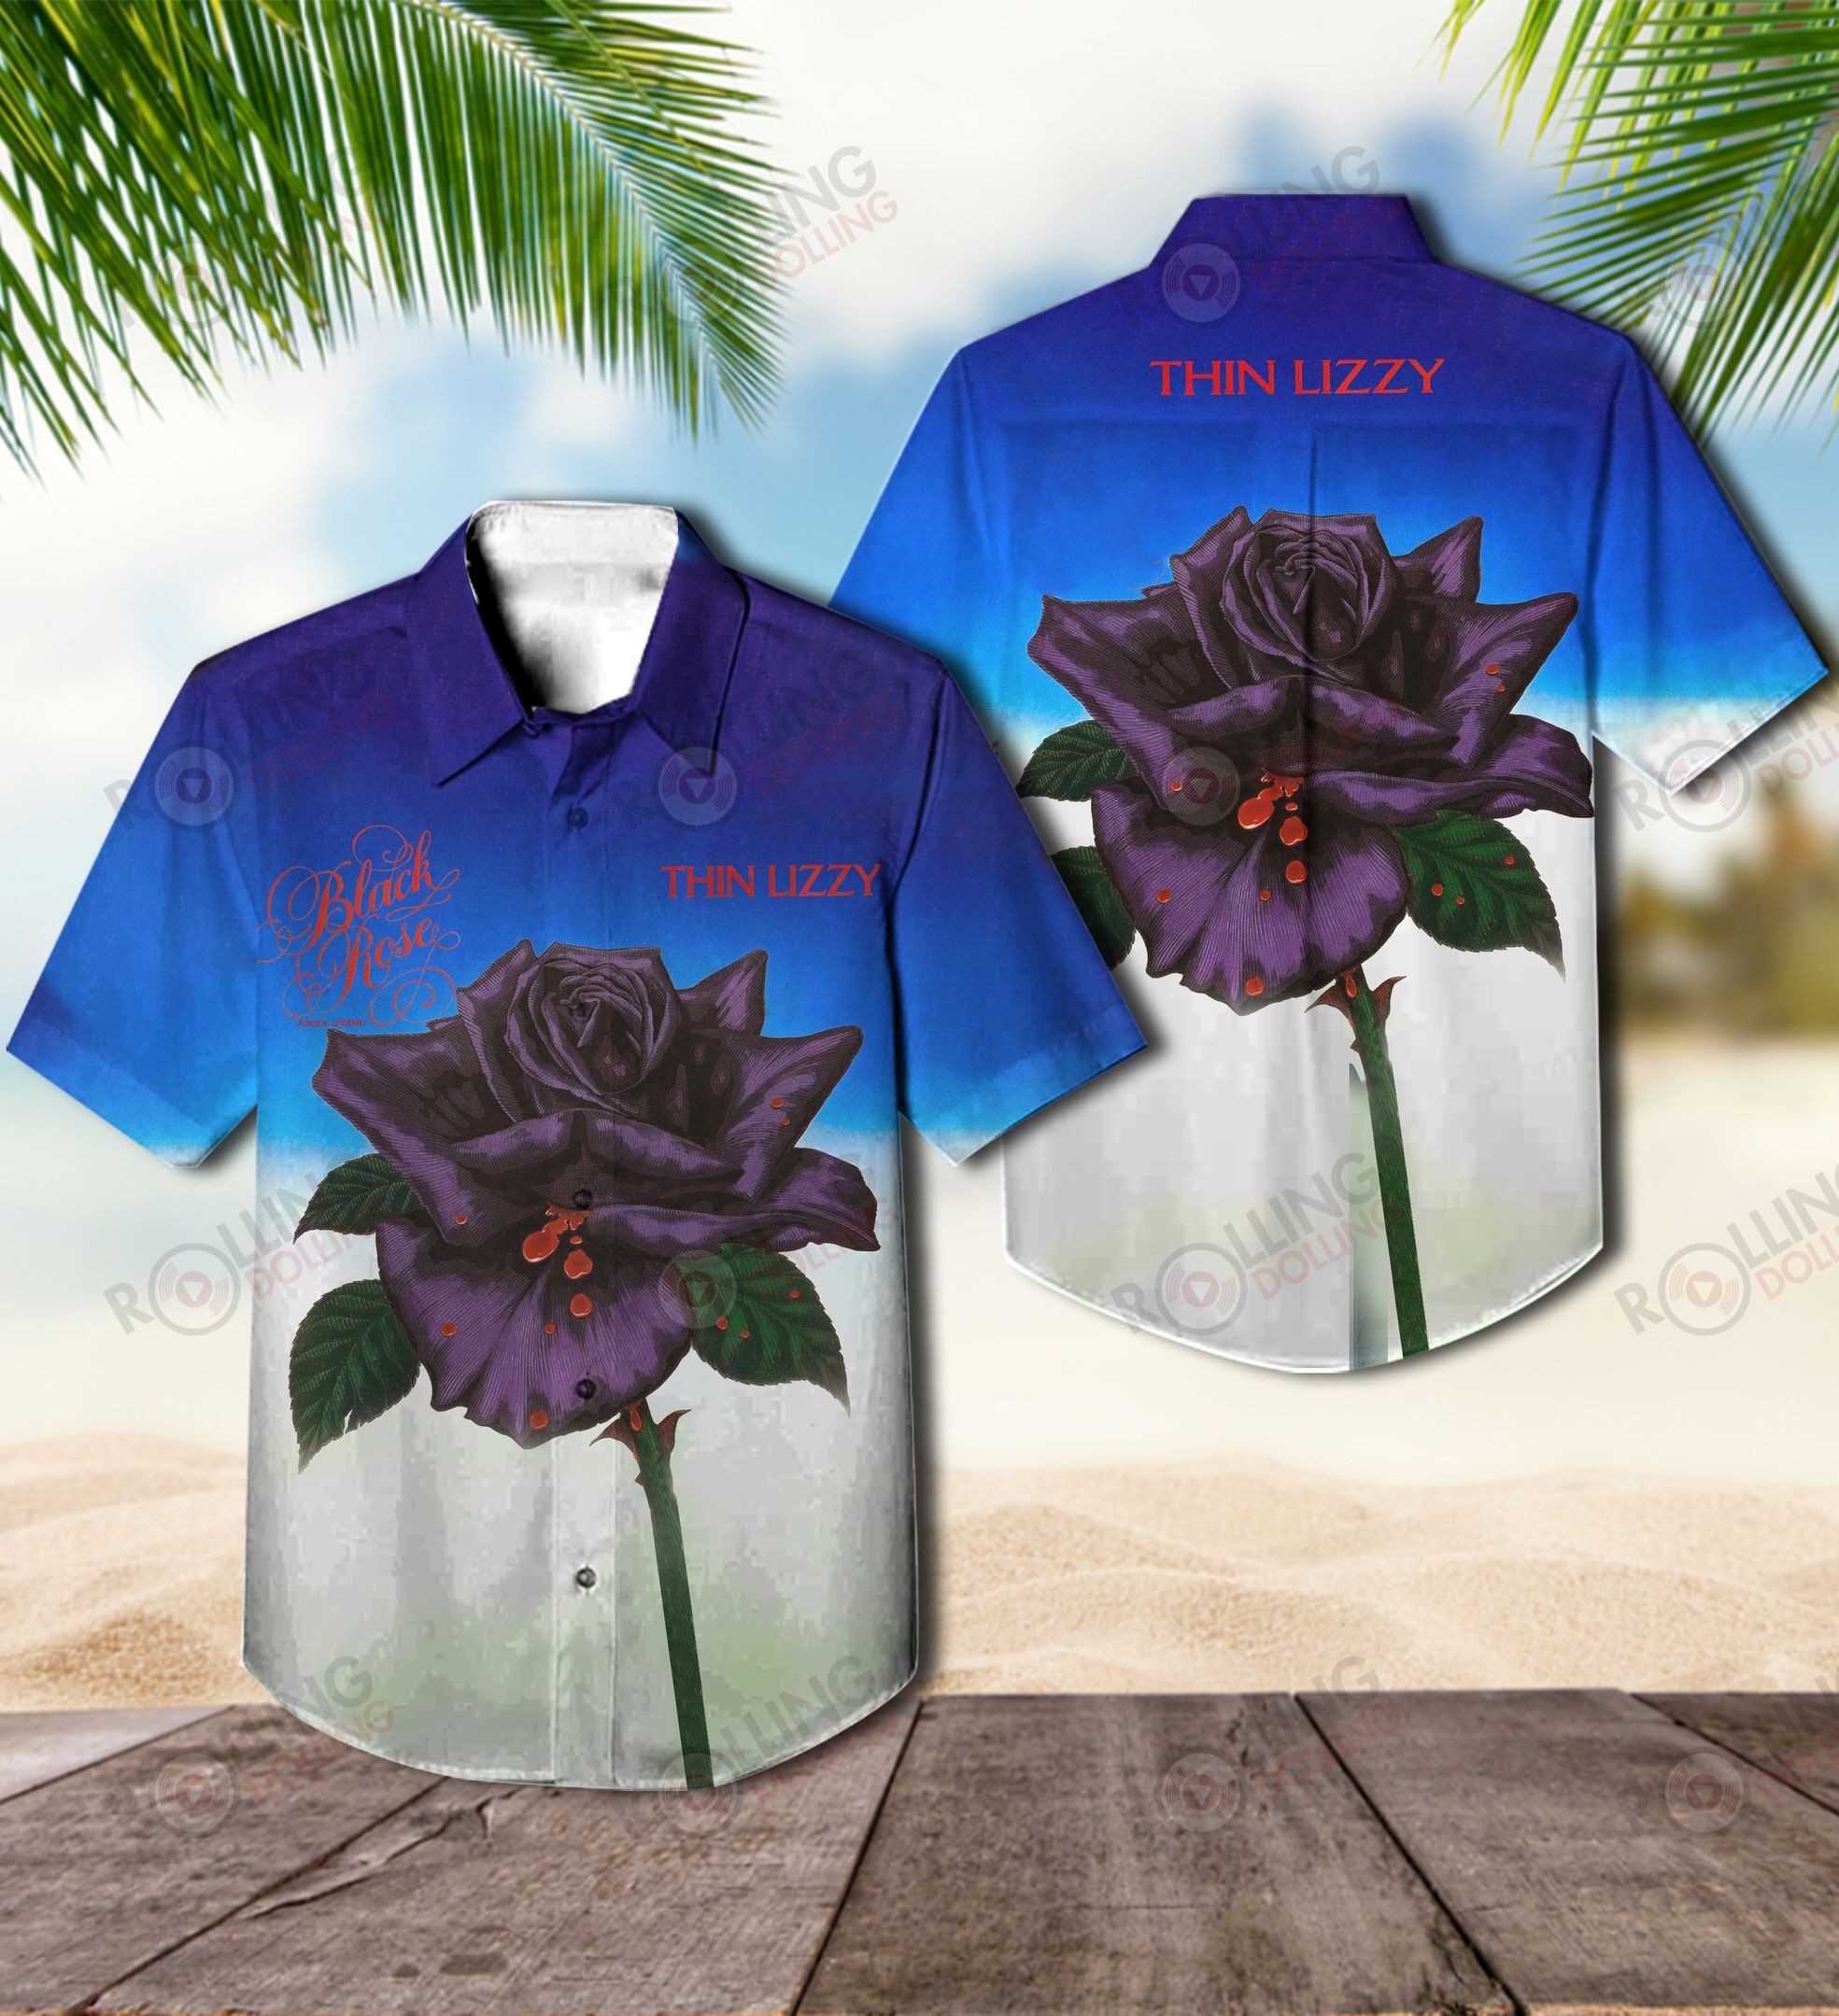 We have compiled a list of some of the best Hawaiian shirt that are available 207